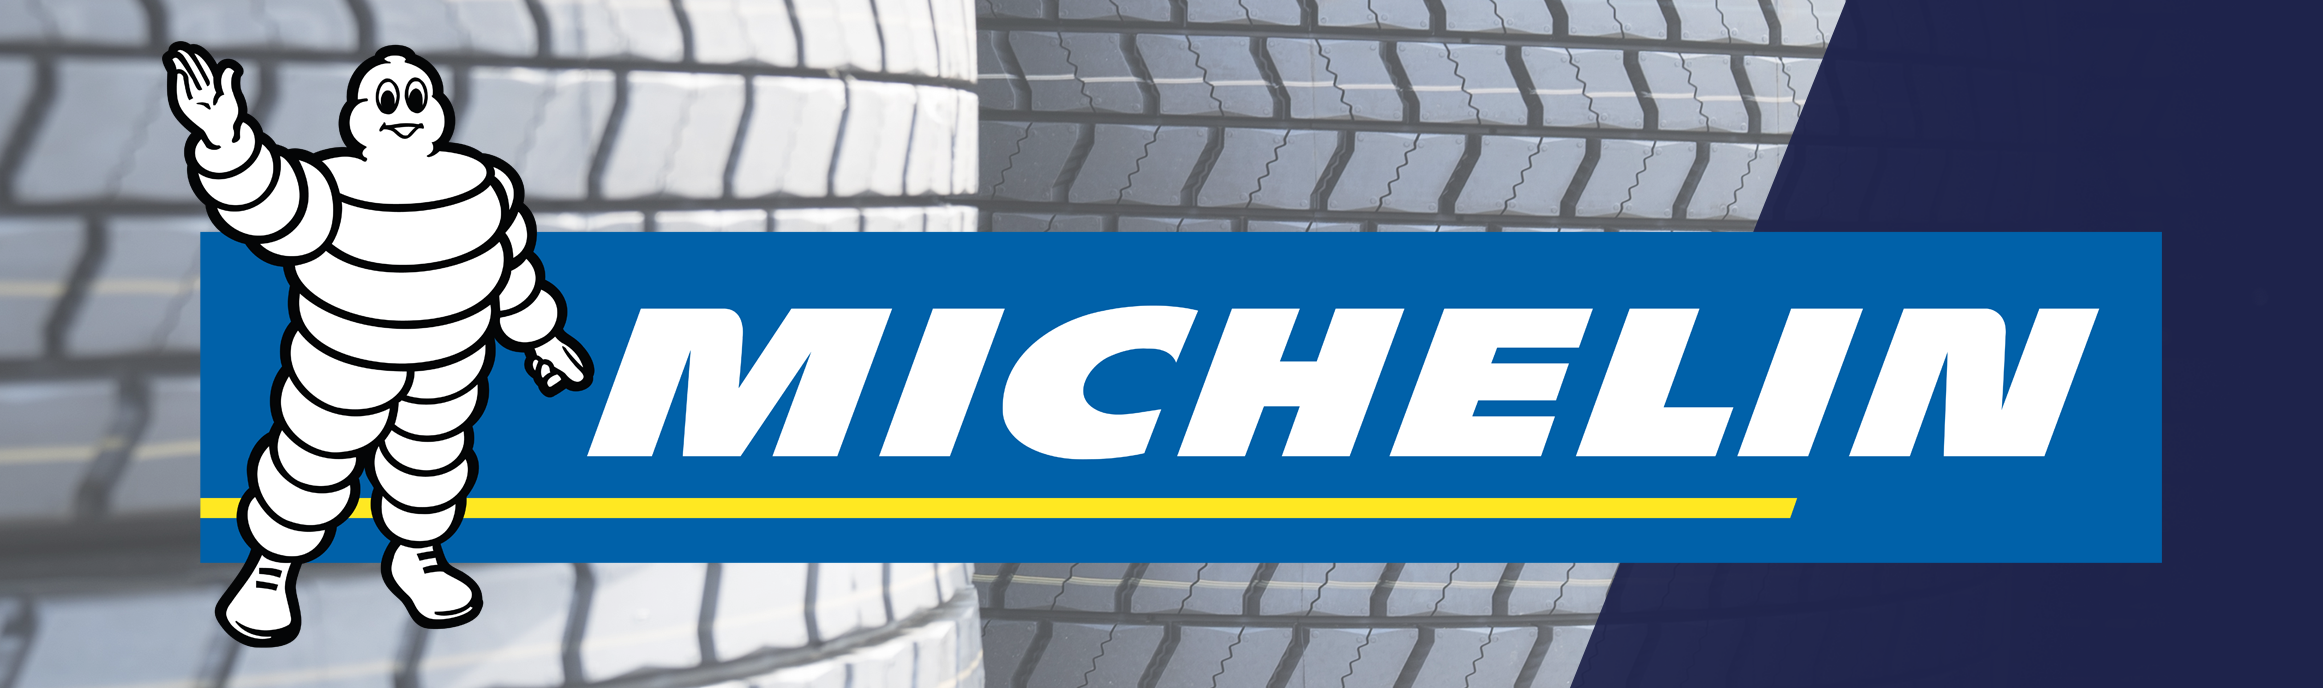 Michelin logo with a background made of tyres